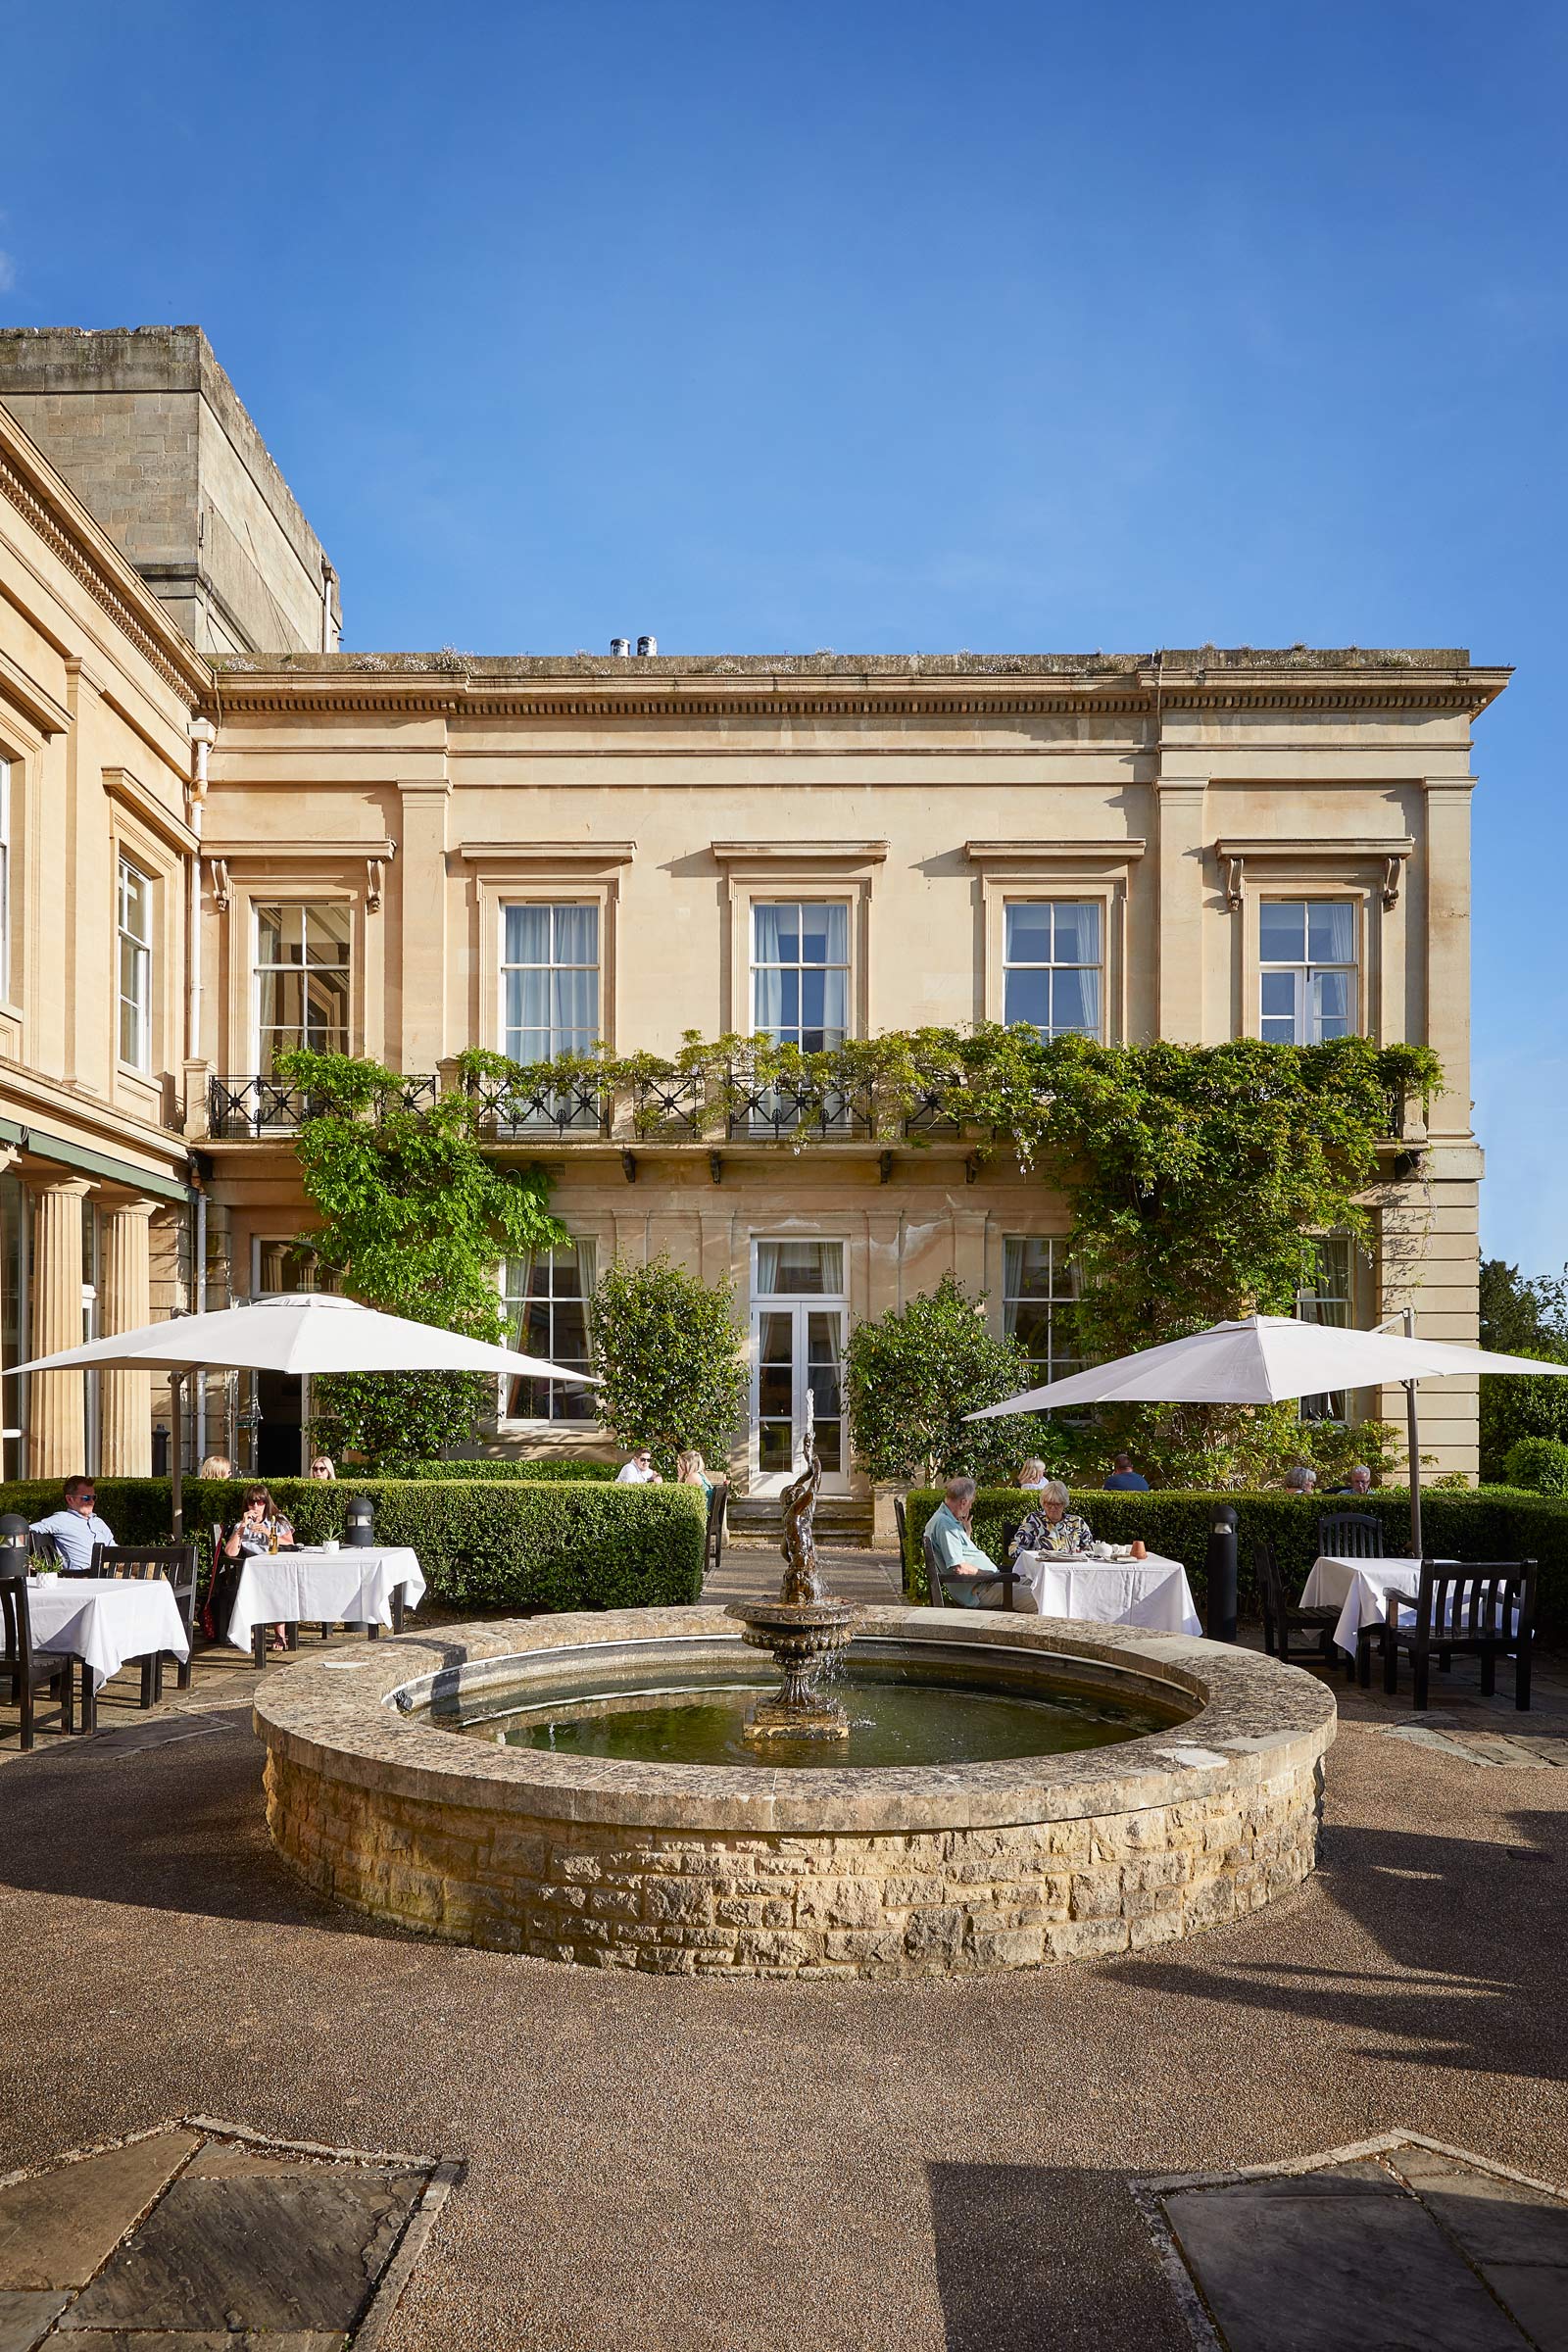 Outdoor Terrace at Bath Spa Hotel, hospitality and travel photographer, Alastair Ferrier, www.aferrier.com